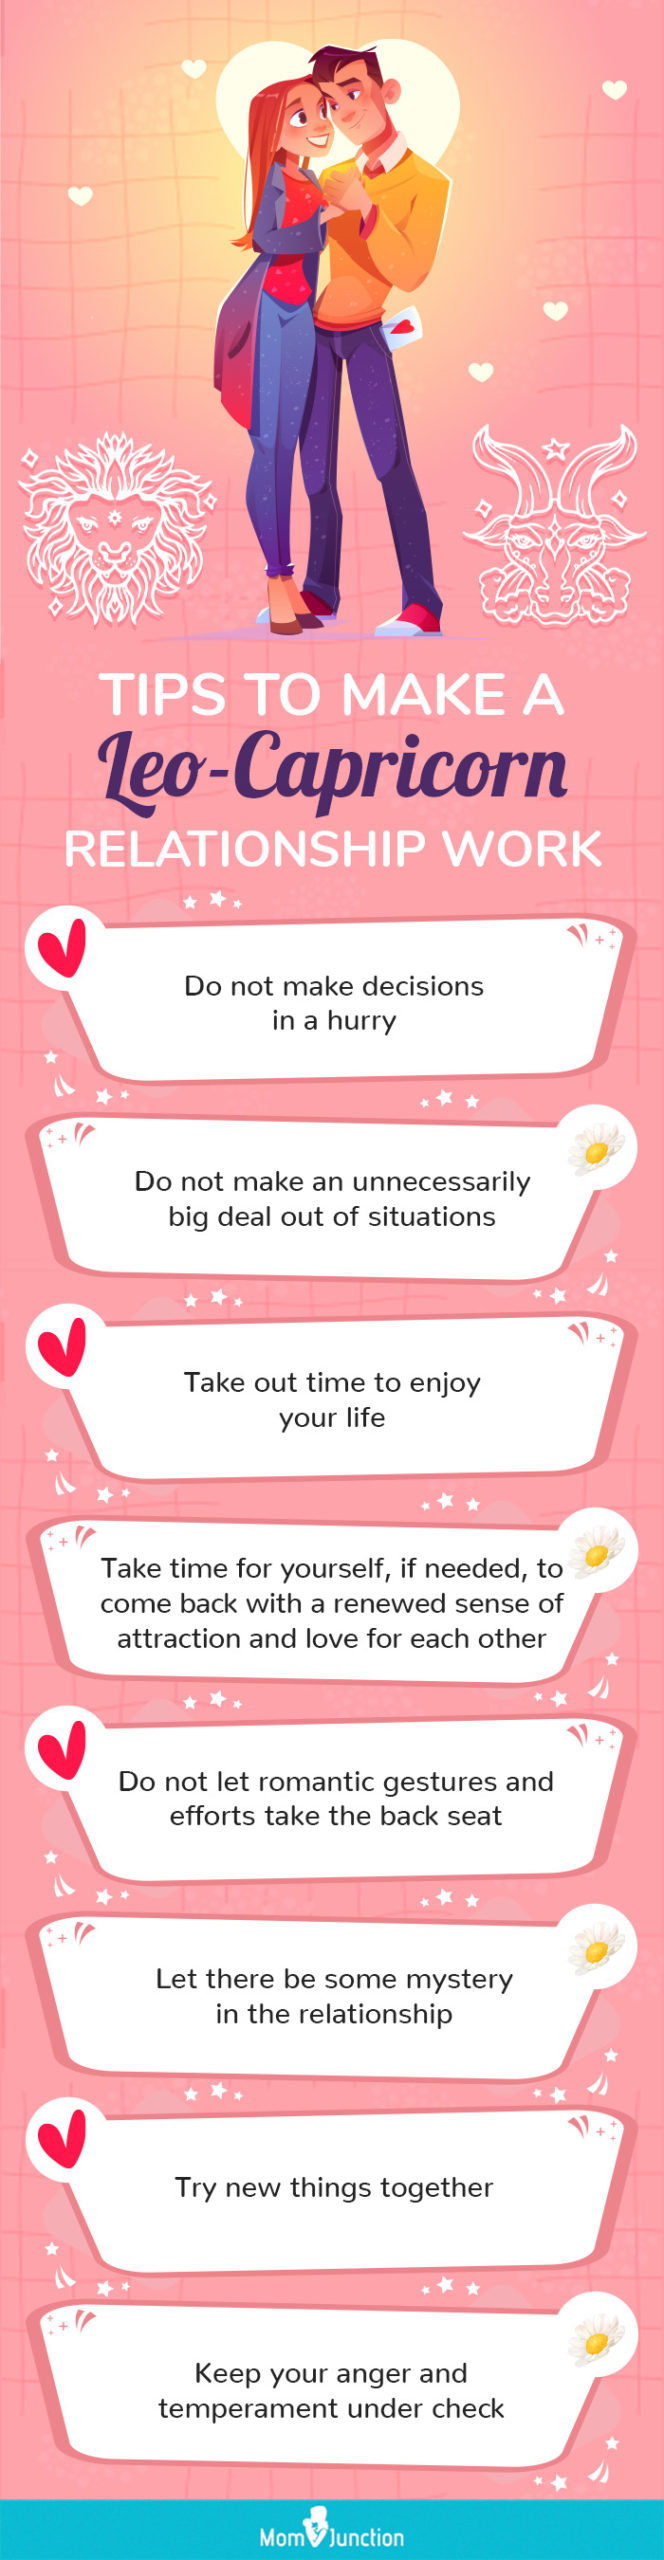 tips to make a leo capricorn relationship work (infographic)